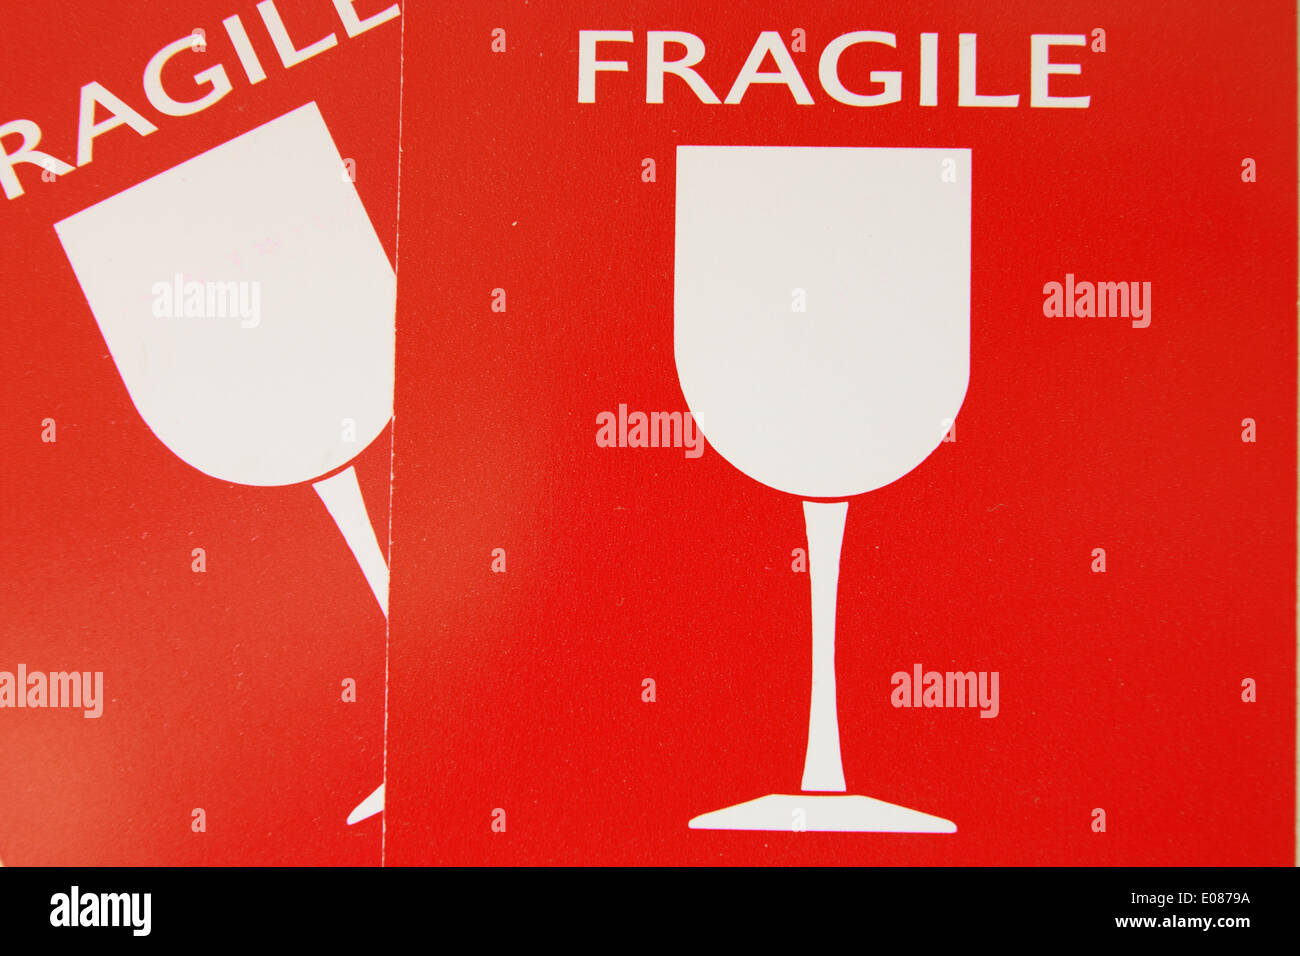 Red label fragile for luggage Stock Photo